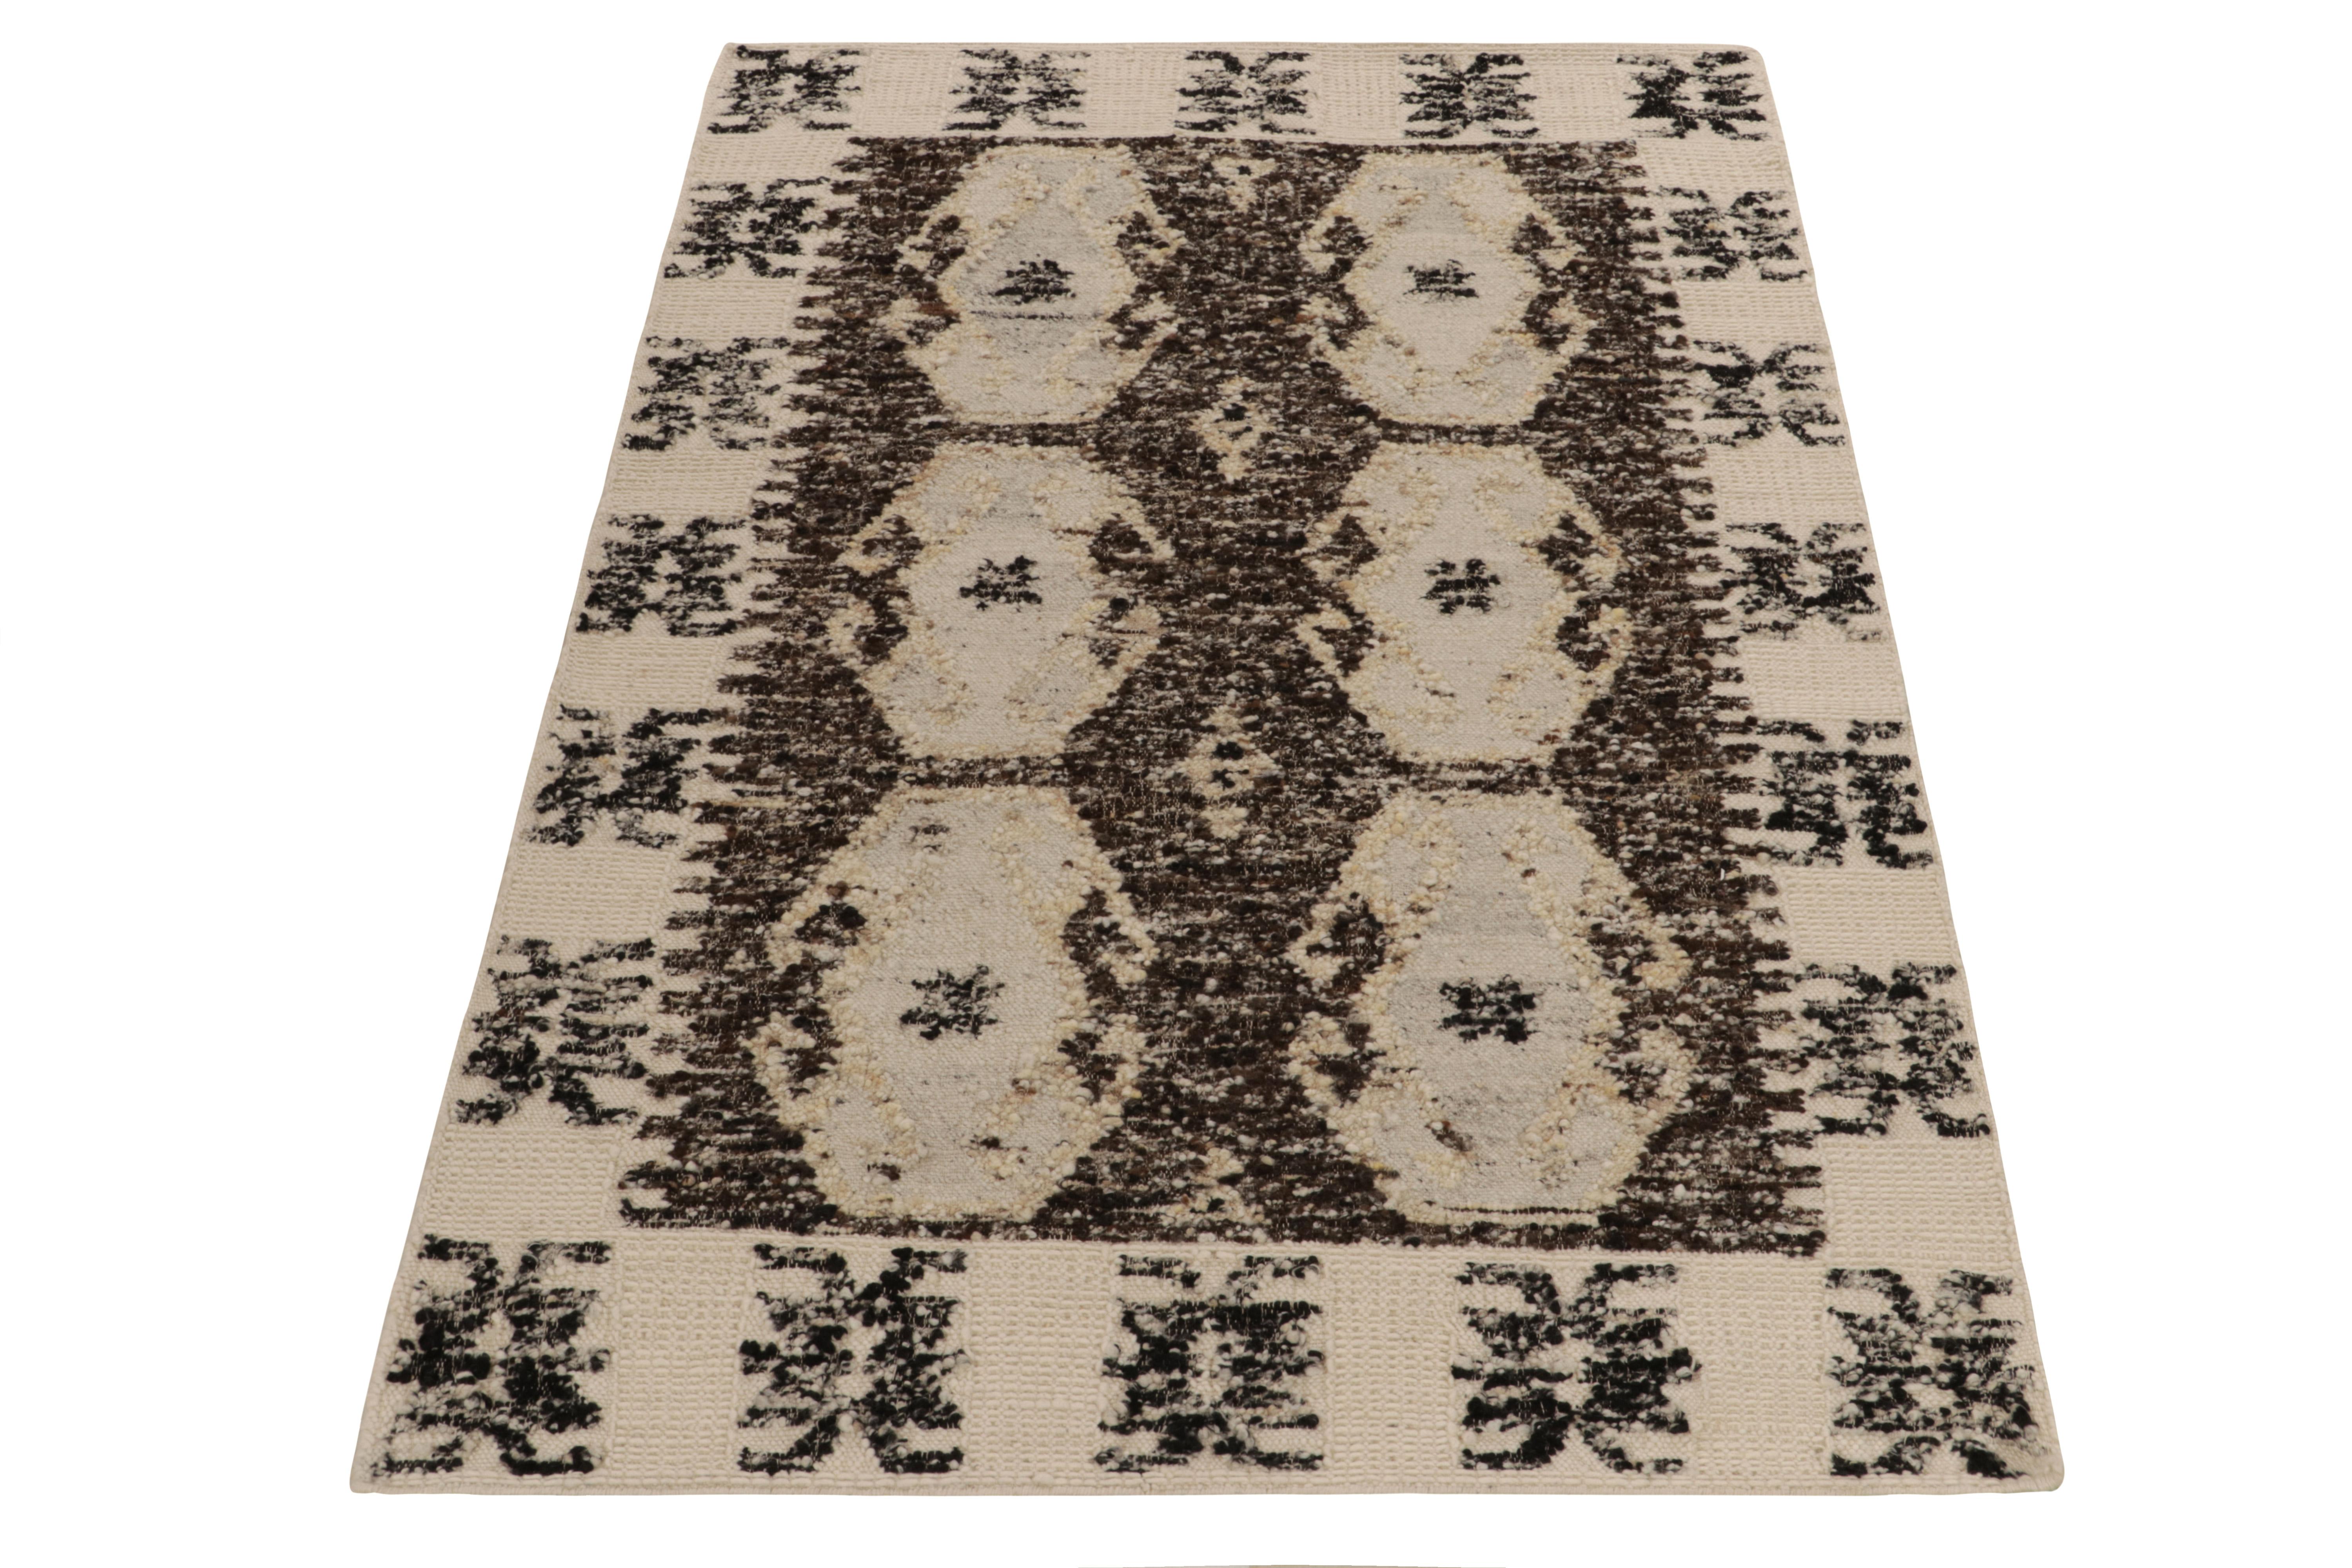 Connoting a bold take on classic aesthetics, Rug & Kilim unveils this 5x8 contemporary flat weave with a distinctive approach in style & technique. The Kilim rug features a well defined geometric pattern in a beige-brown colorway with subtle hints